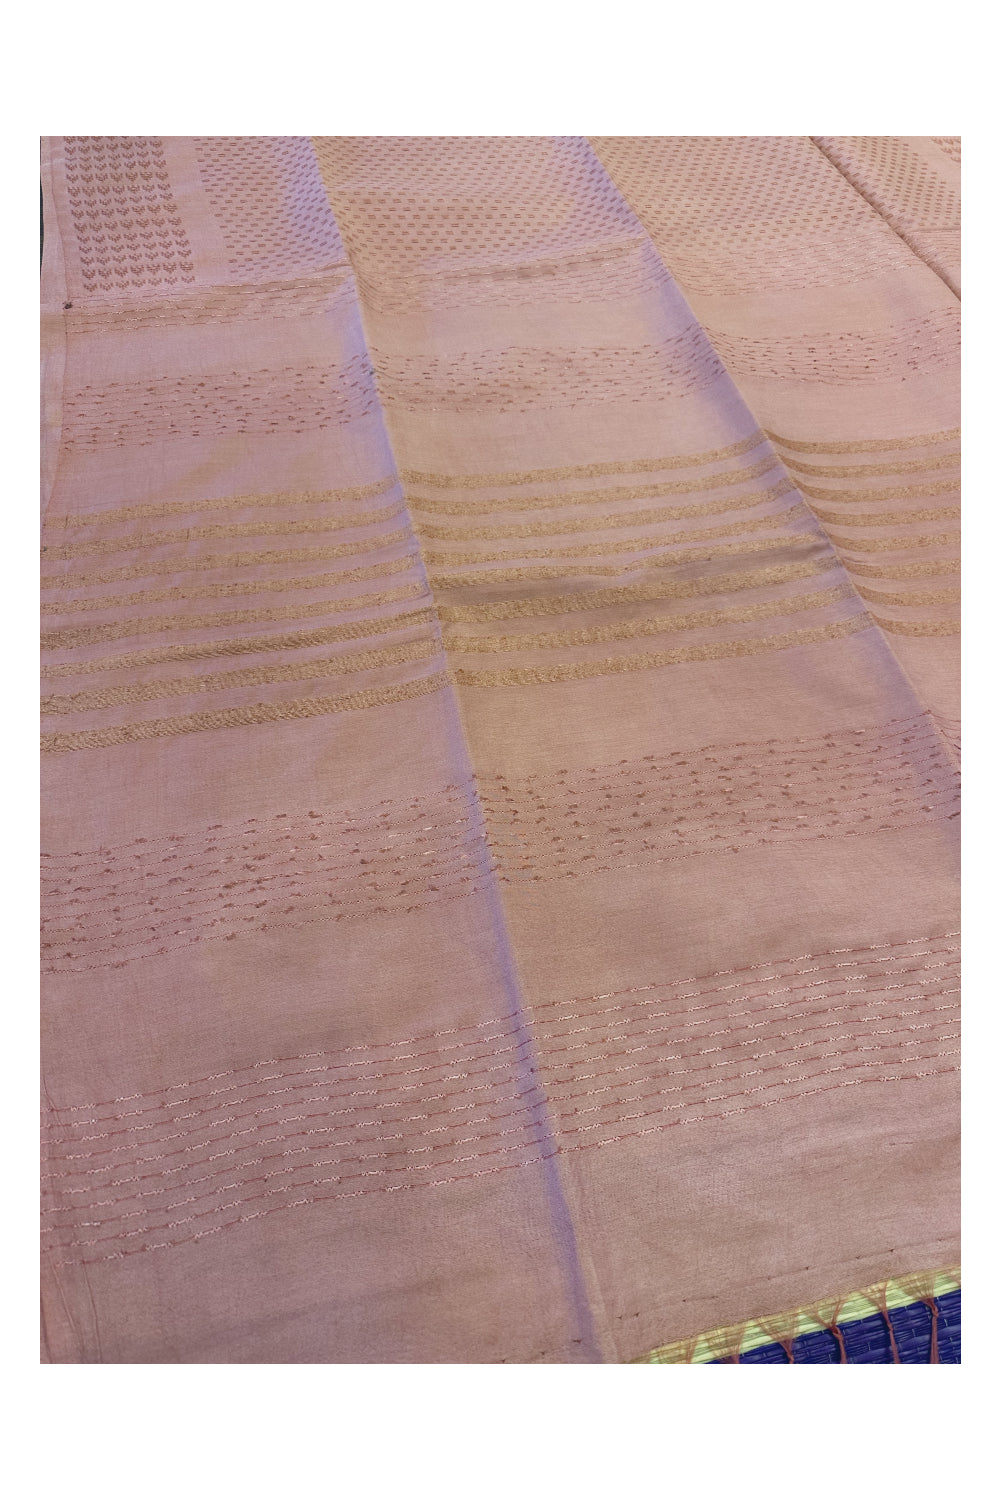 Southloom Pure Tussar Saree with Plain Body and Blouse Piece in Pinkish Shade